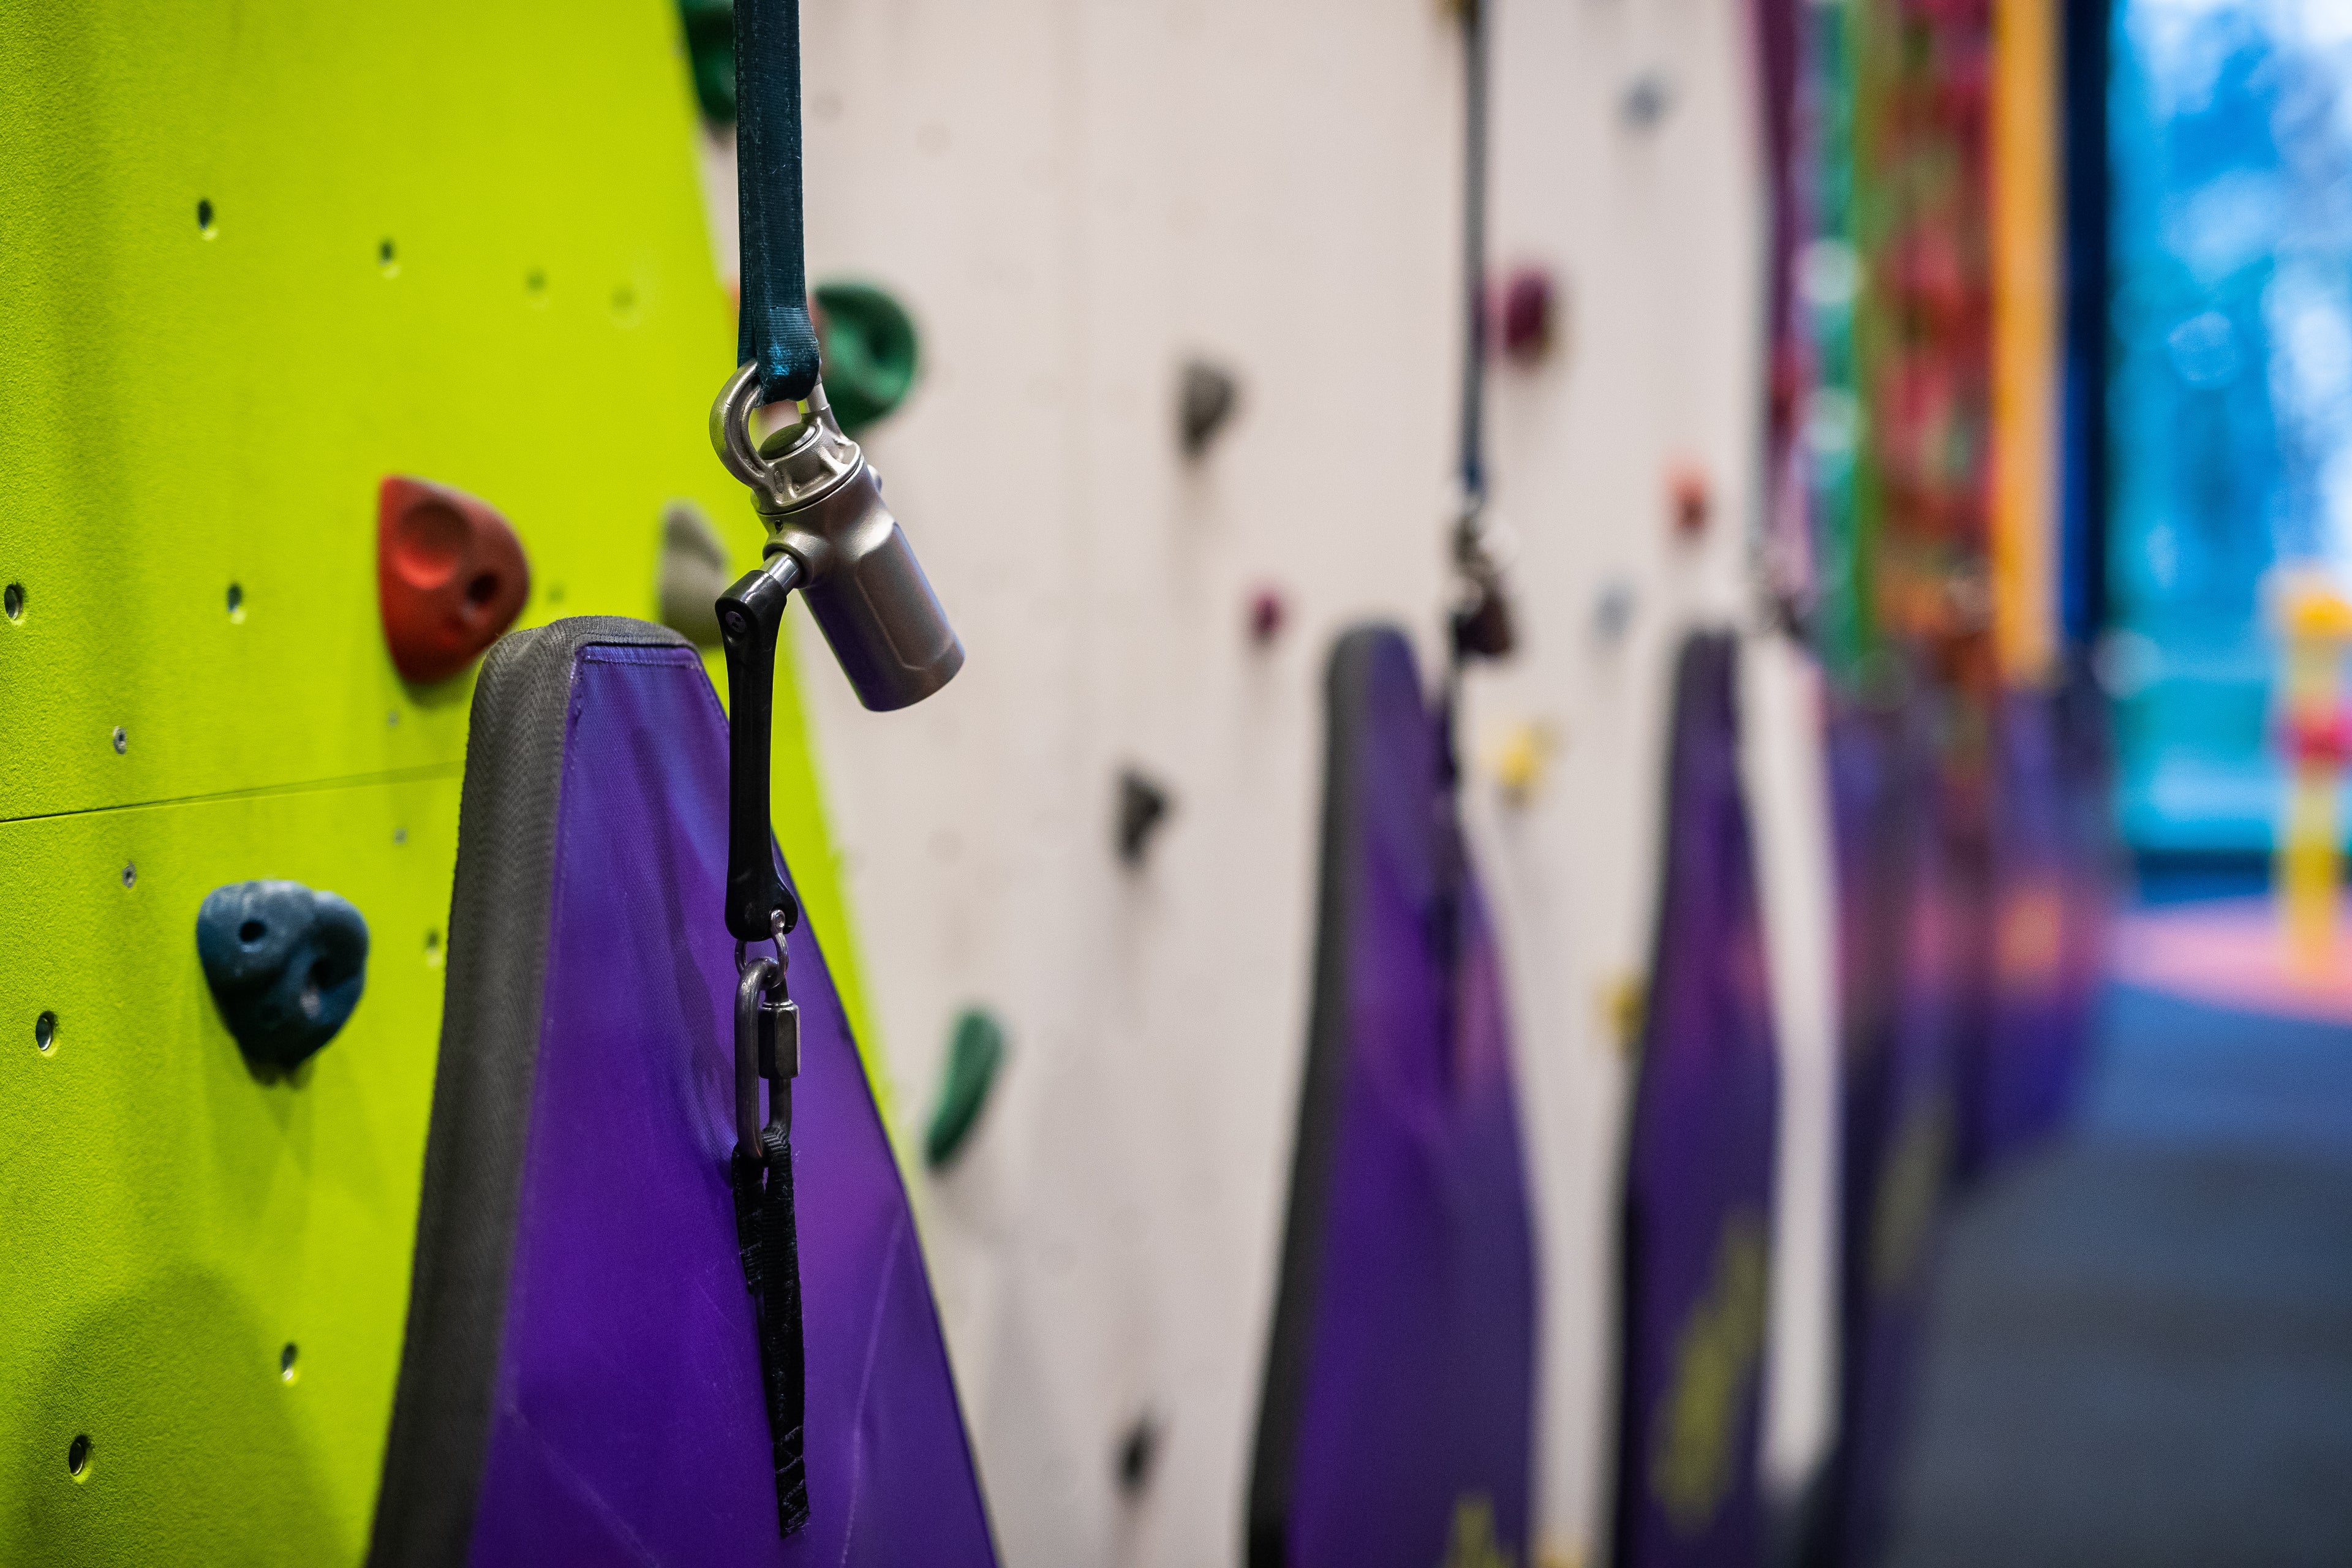 An EP Climbing BelayMate attached to a Clip 'n Climb ground anchor and auto belay